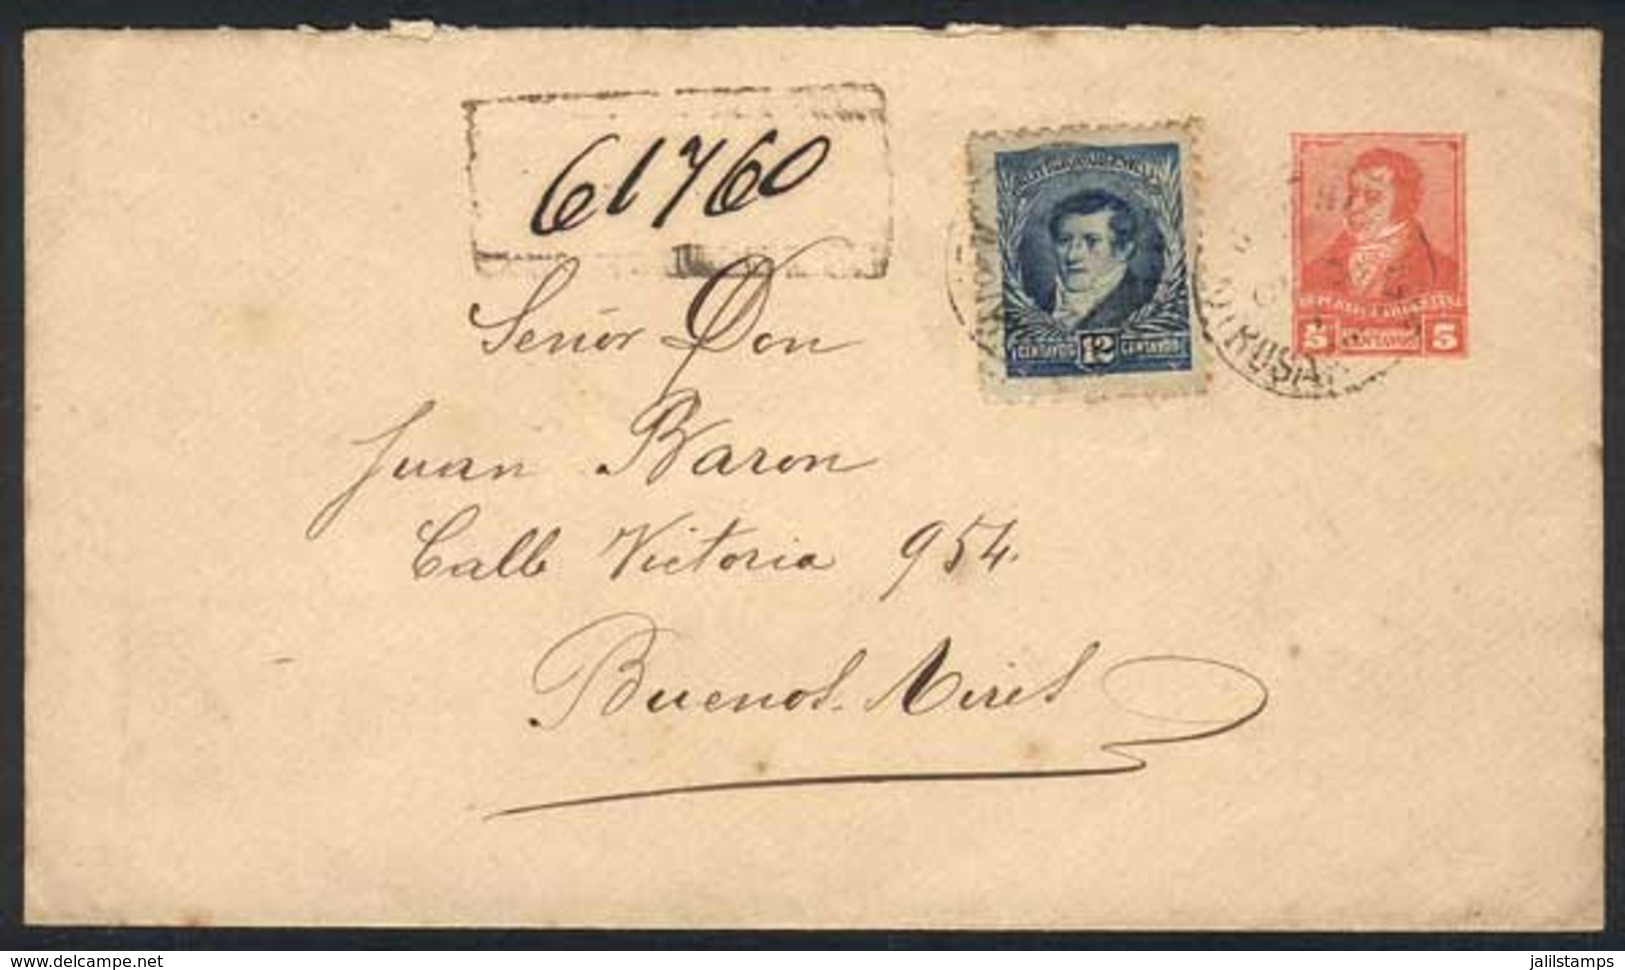 ARGENTINA: 5c. Stationery Cover + GJ.144, Sent By Registered Mail From Rosario To Buenos Aires In OC/1895, VF Quality! - Voorfilatelie